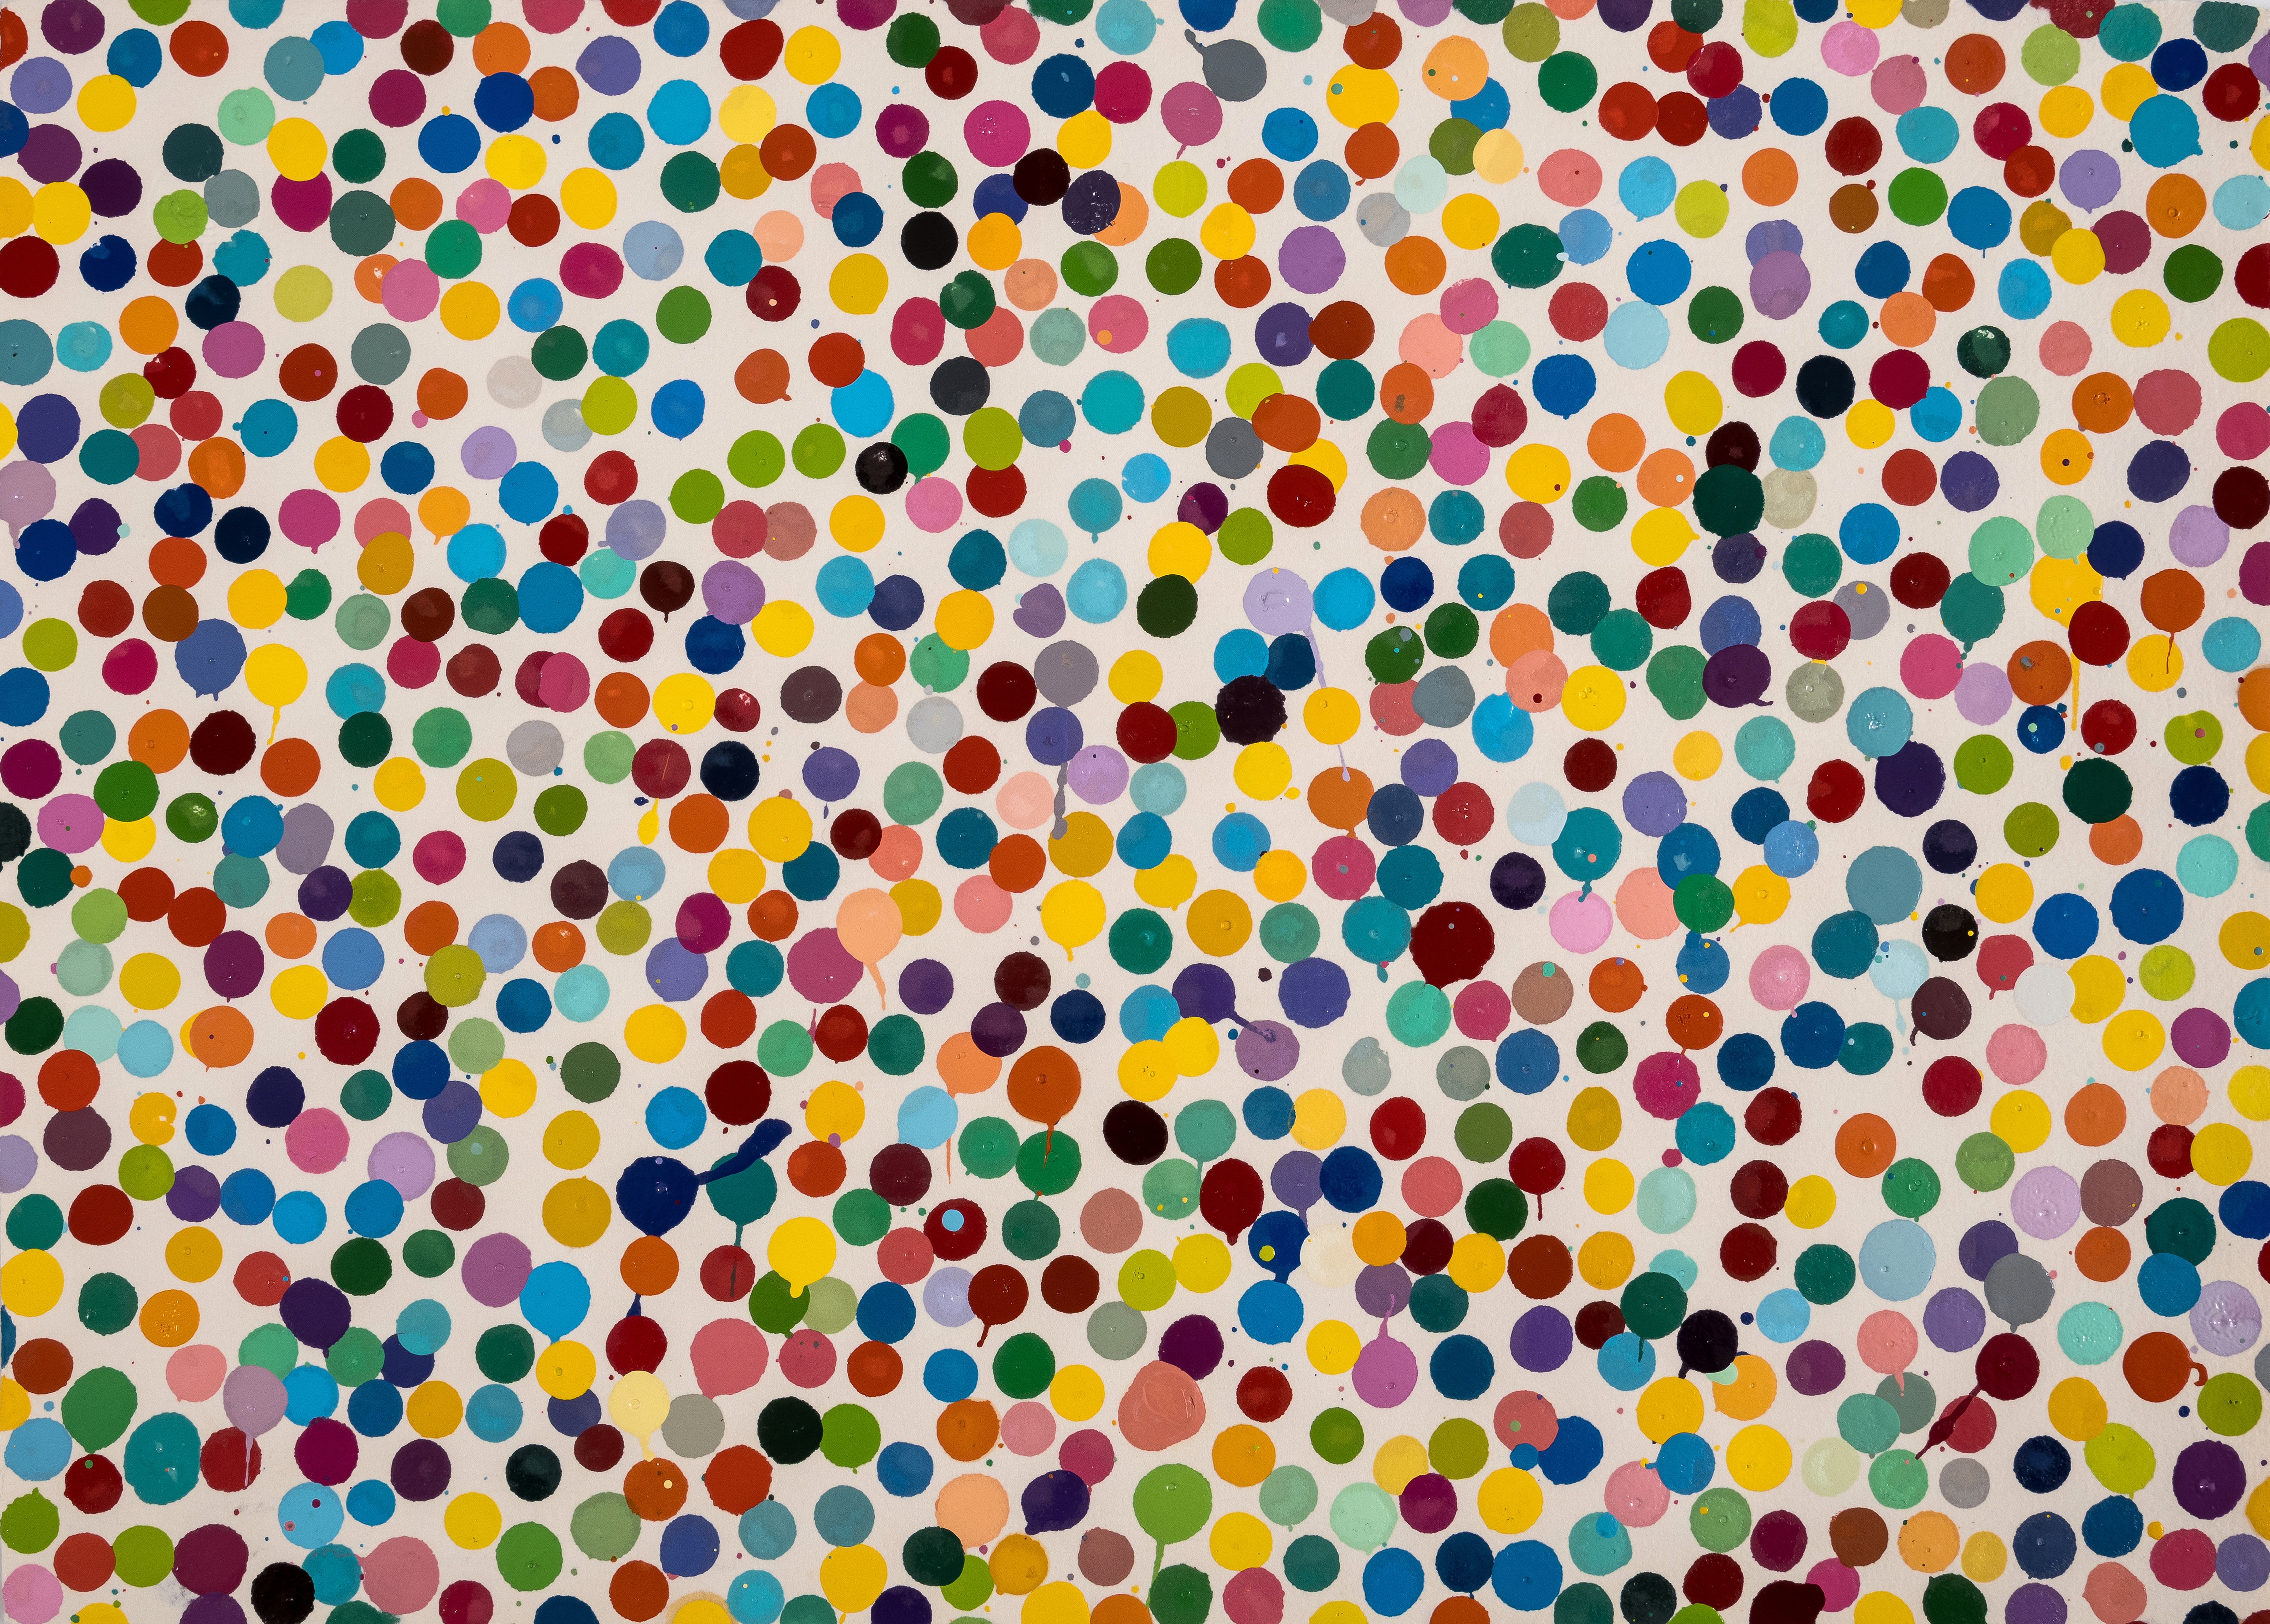 Damien Hirst (b. 1965) Suddenly Awake, 2016, from The Currency